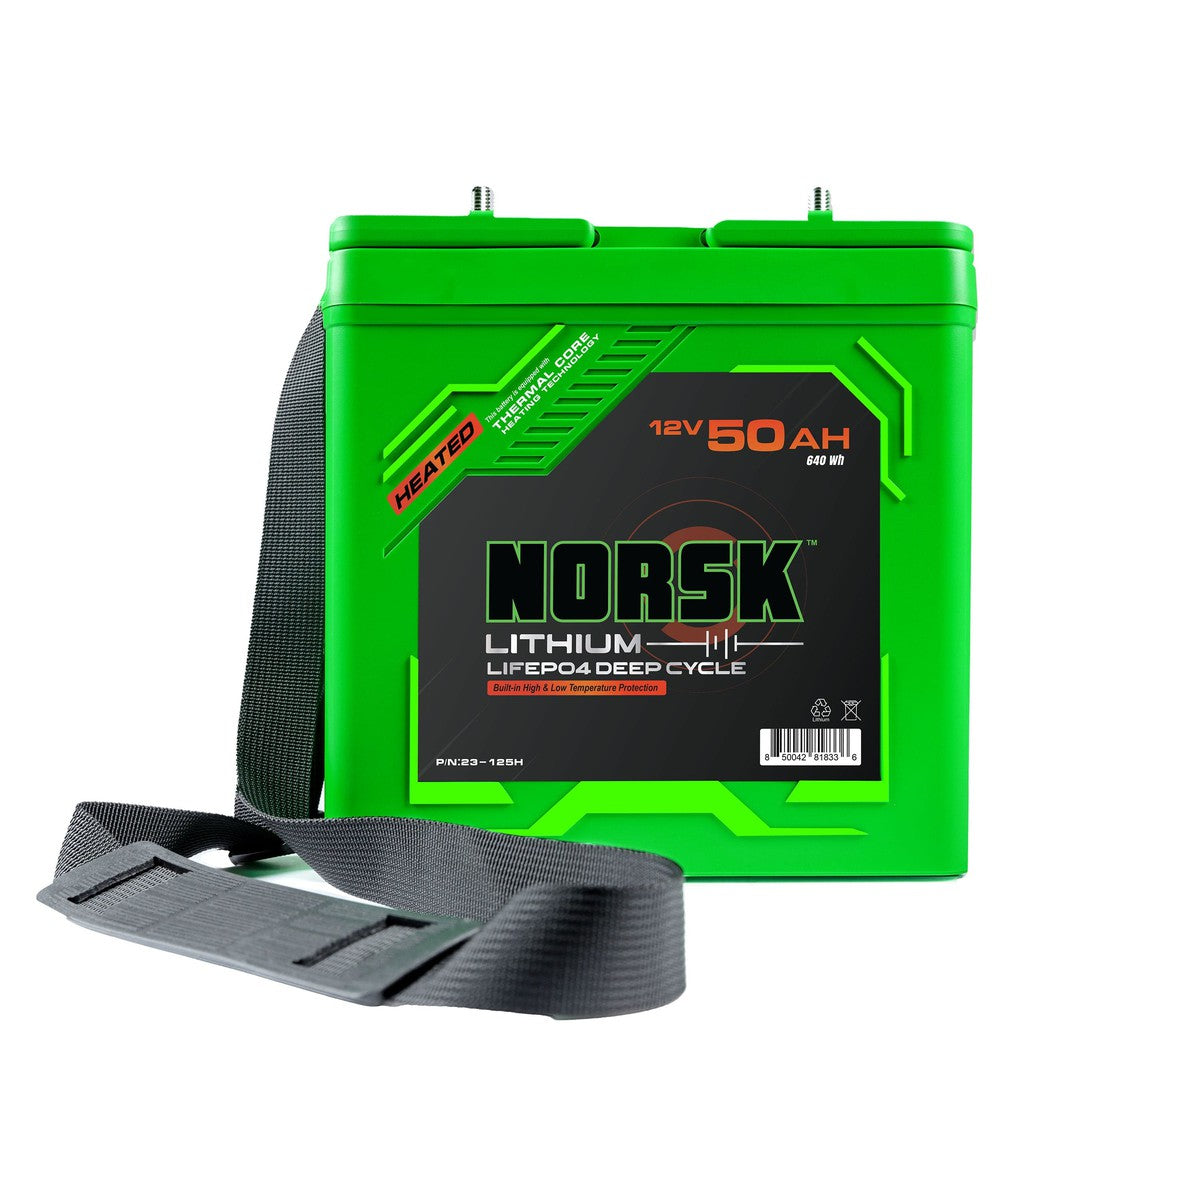 Norsk Qualifies for Free Shipping Norsk LIFEPO4 Battery Guardian Heated 12.8v 50Ah #23-125H